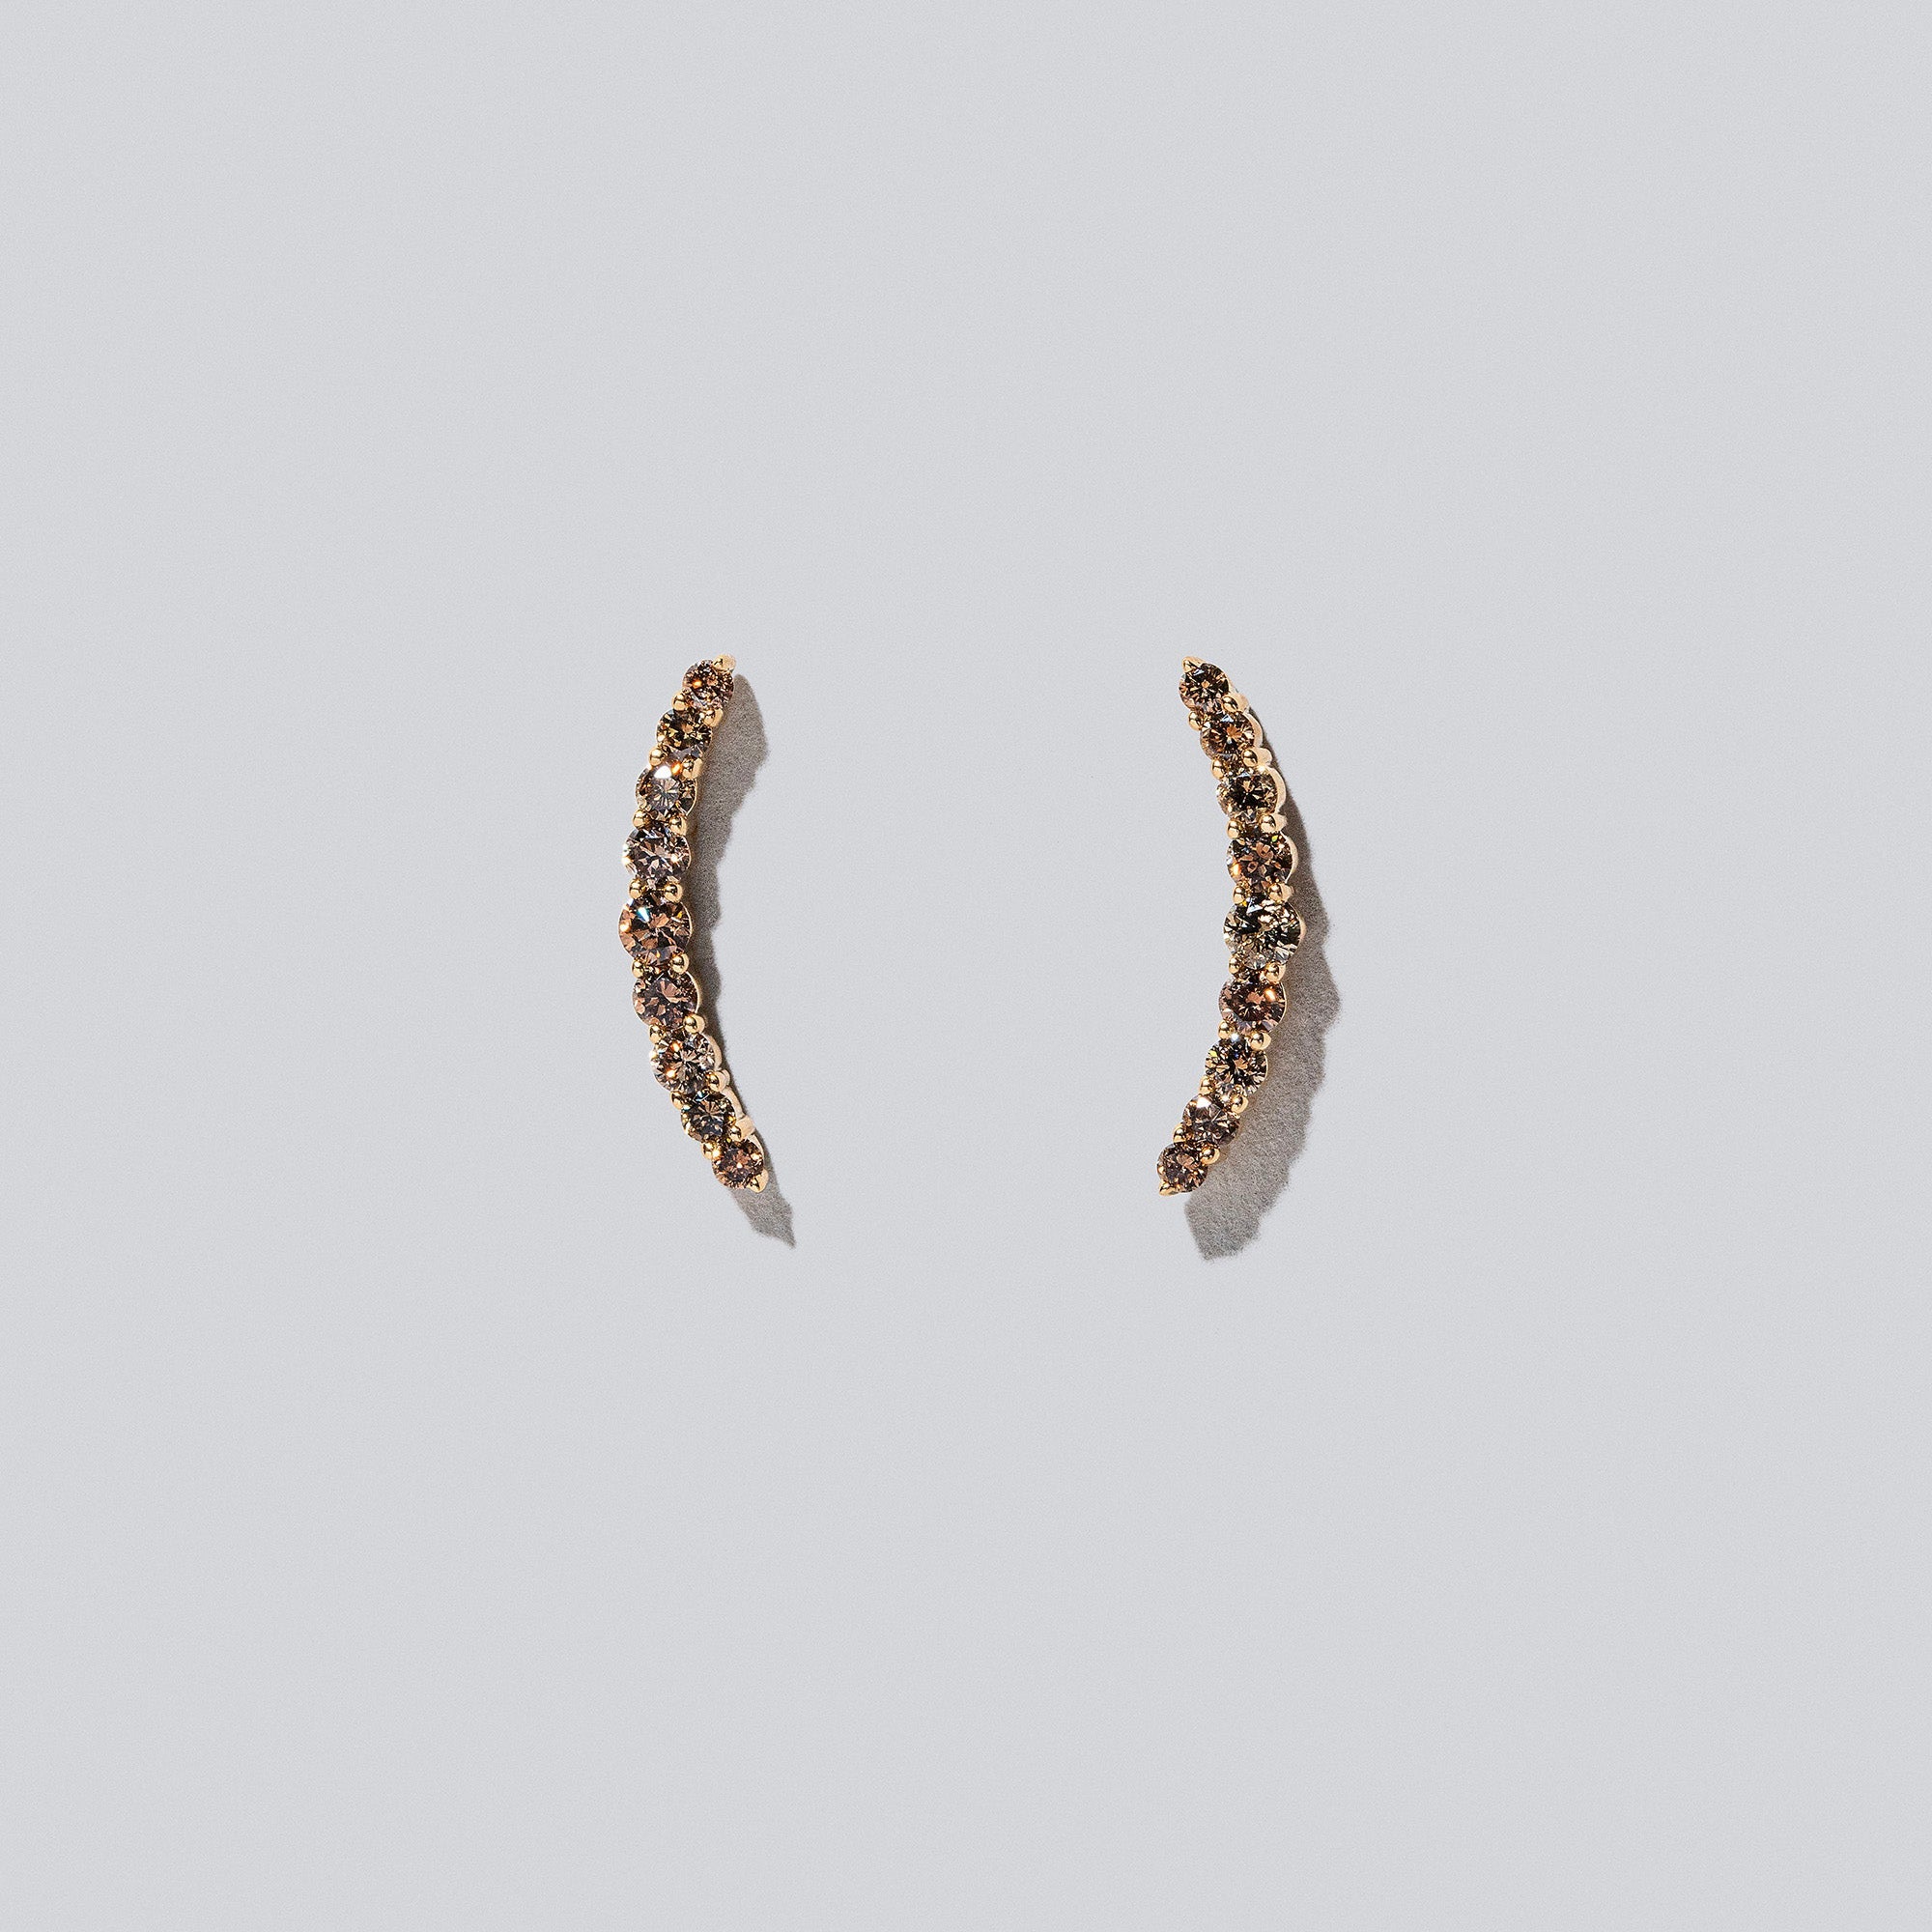 product_details::Crescent Ear Climber Stud Earrings - Cognac Diamond on light colored background.